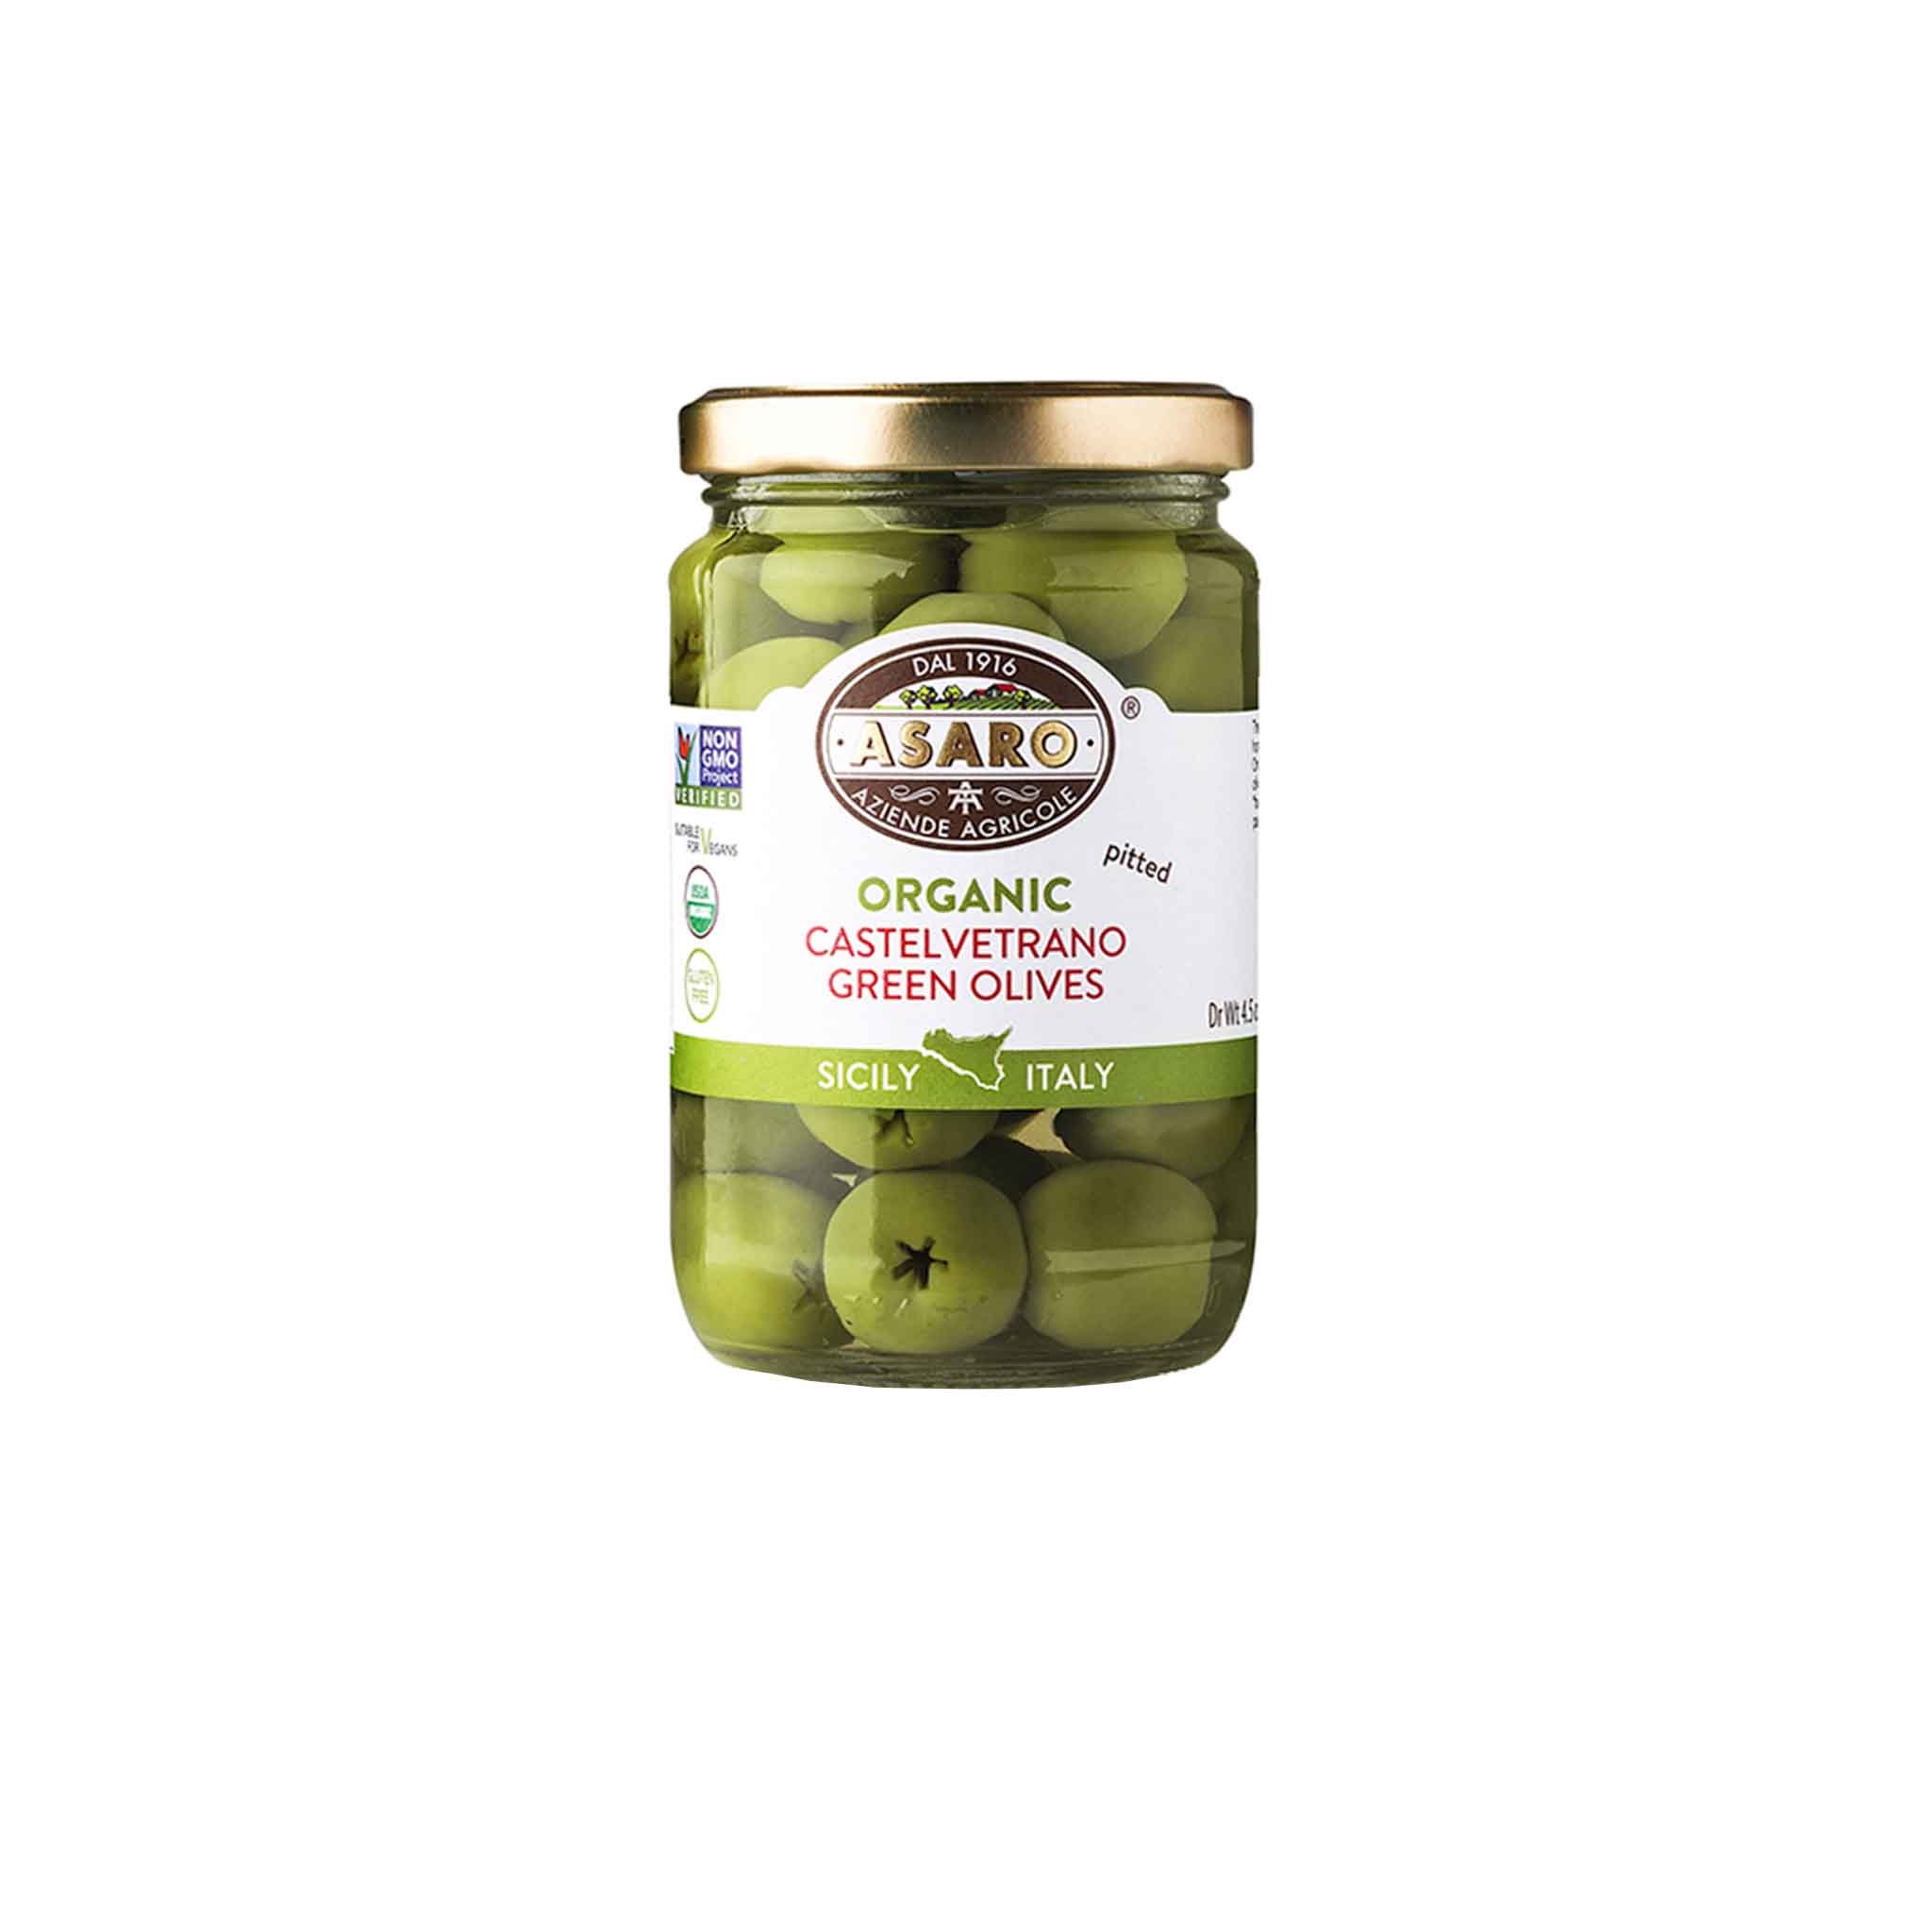 ASARO PITTED CASTELVETRANO OLIVES 130g